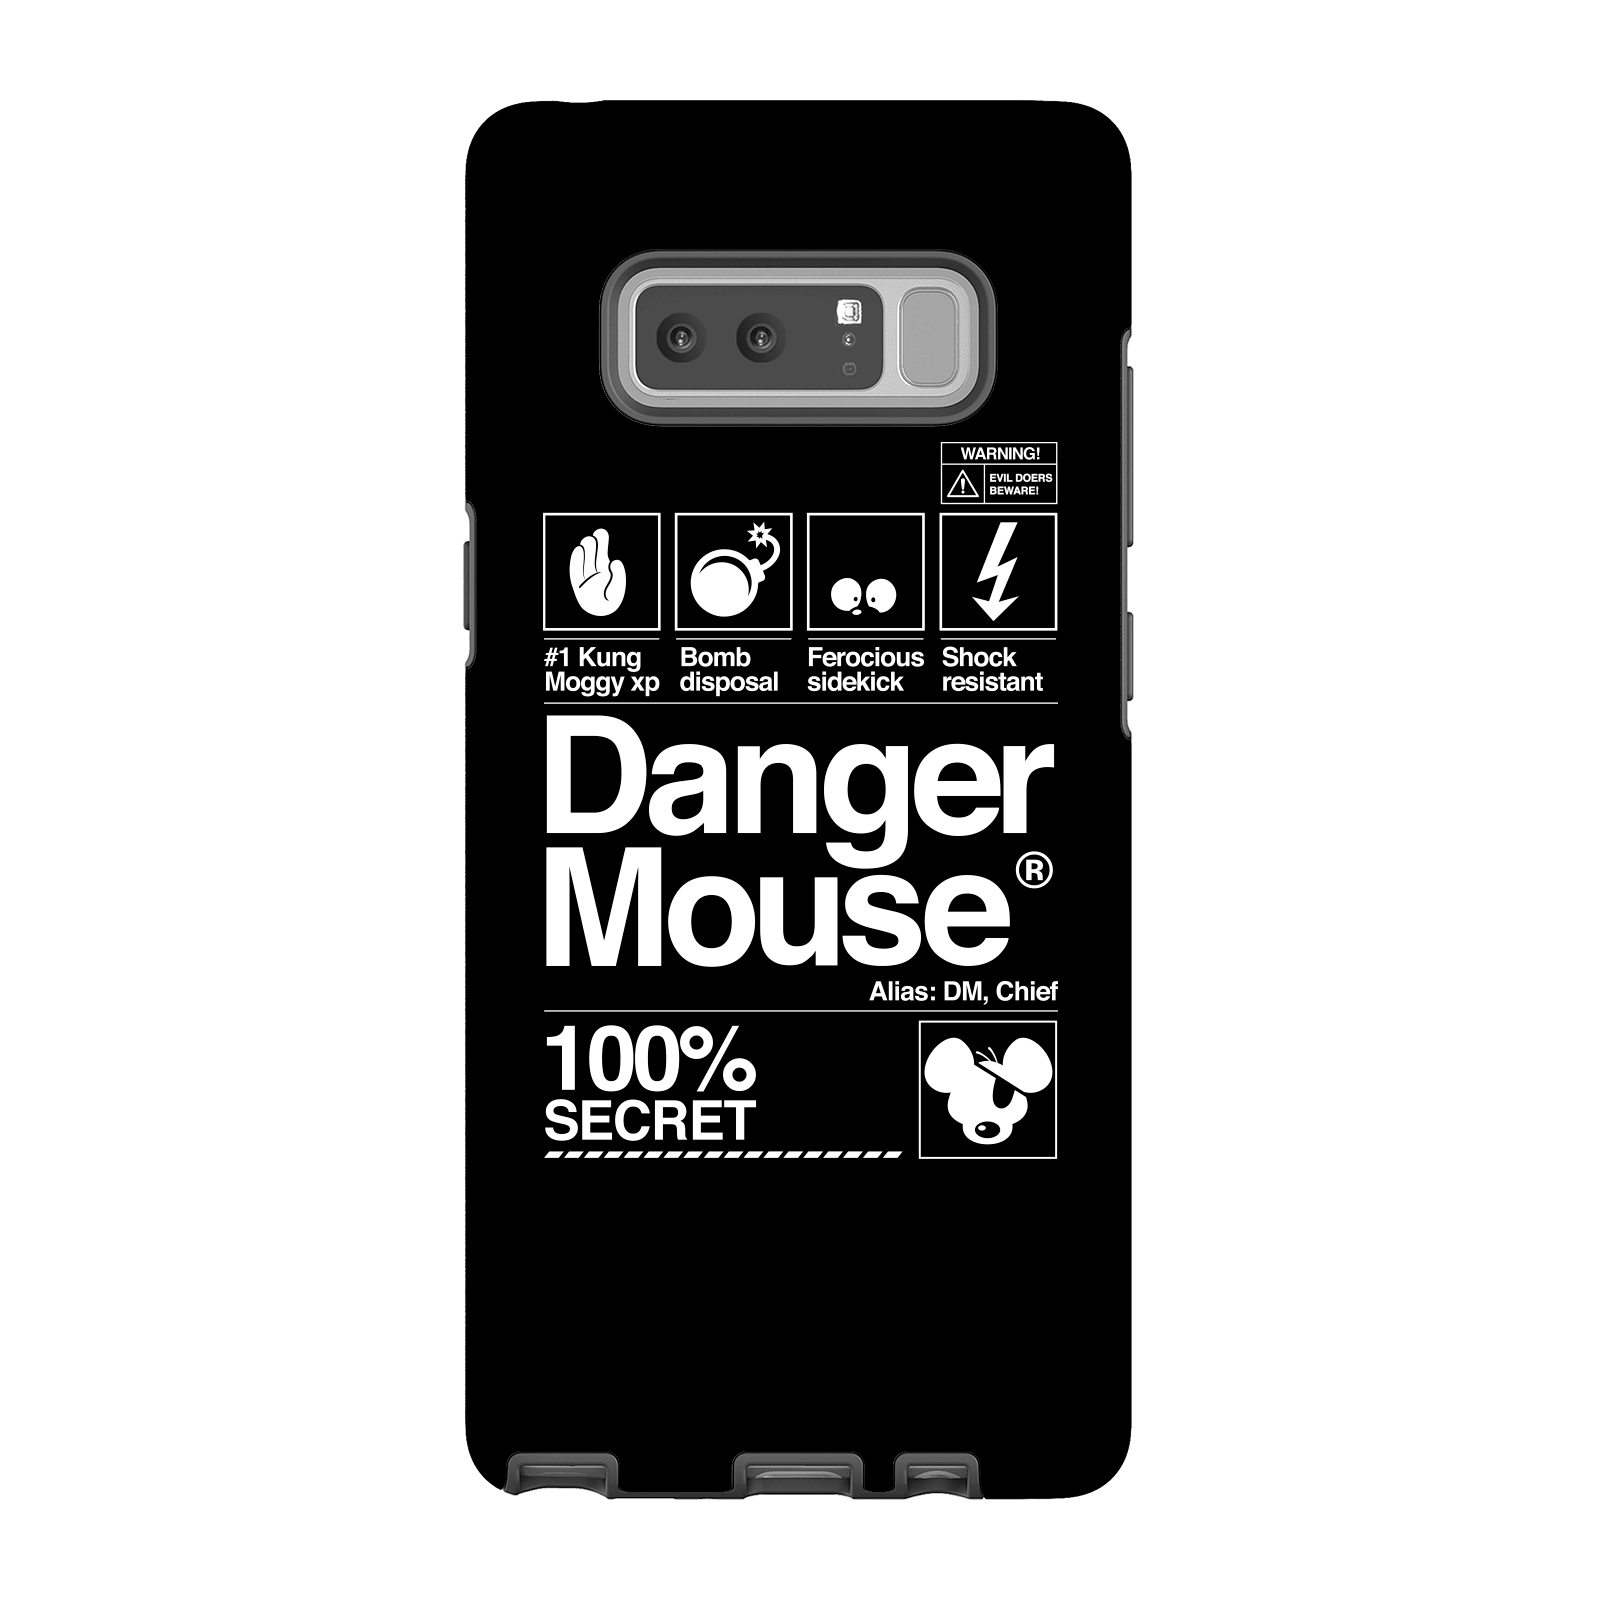 Danger Mouse 100% Secret Phone Case for iPhone and Android - Samsung Note 8 - Tough Case - Gloss